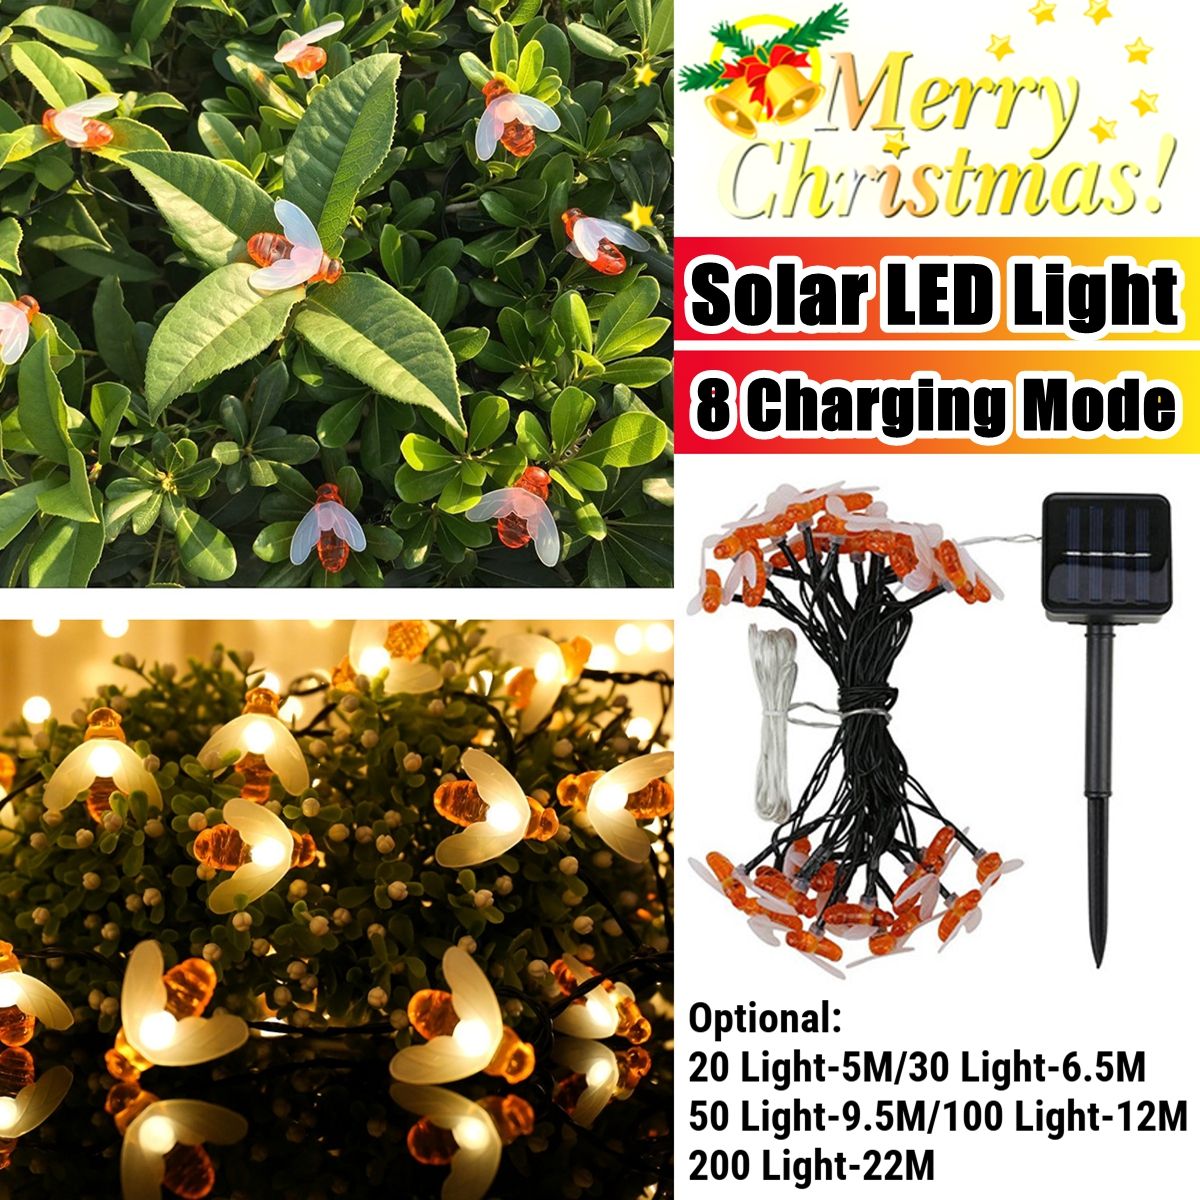 5M65M95M12M22M-LED-Solar-Powered-Bee-String-Light-Outdoor-Party-Fairy-Lamp-Patio-Garden-Yard-Decor-1735420